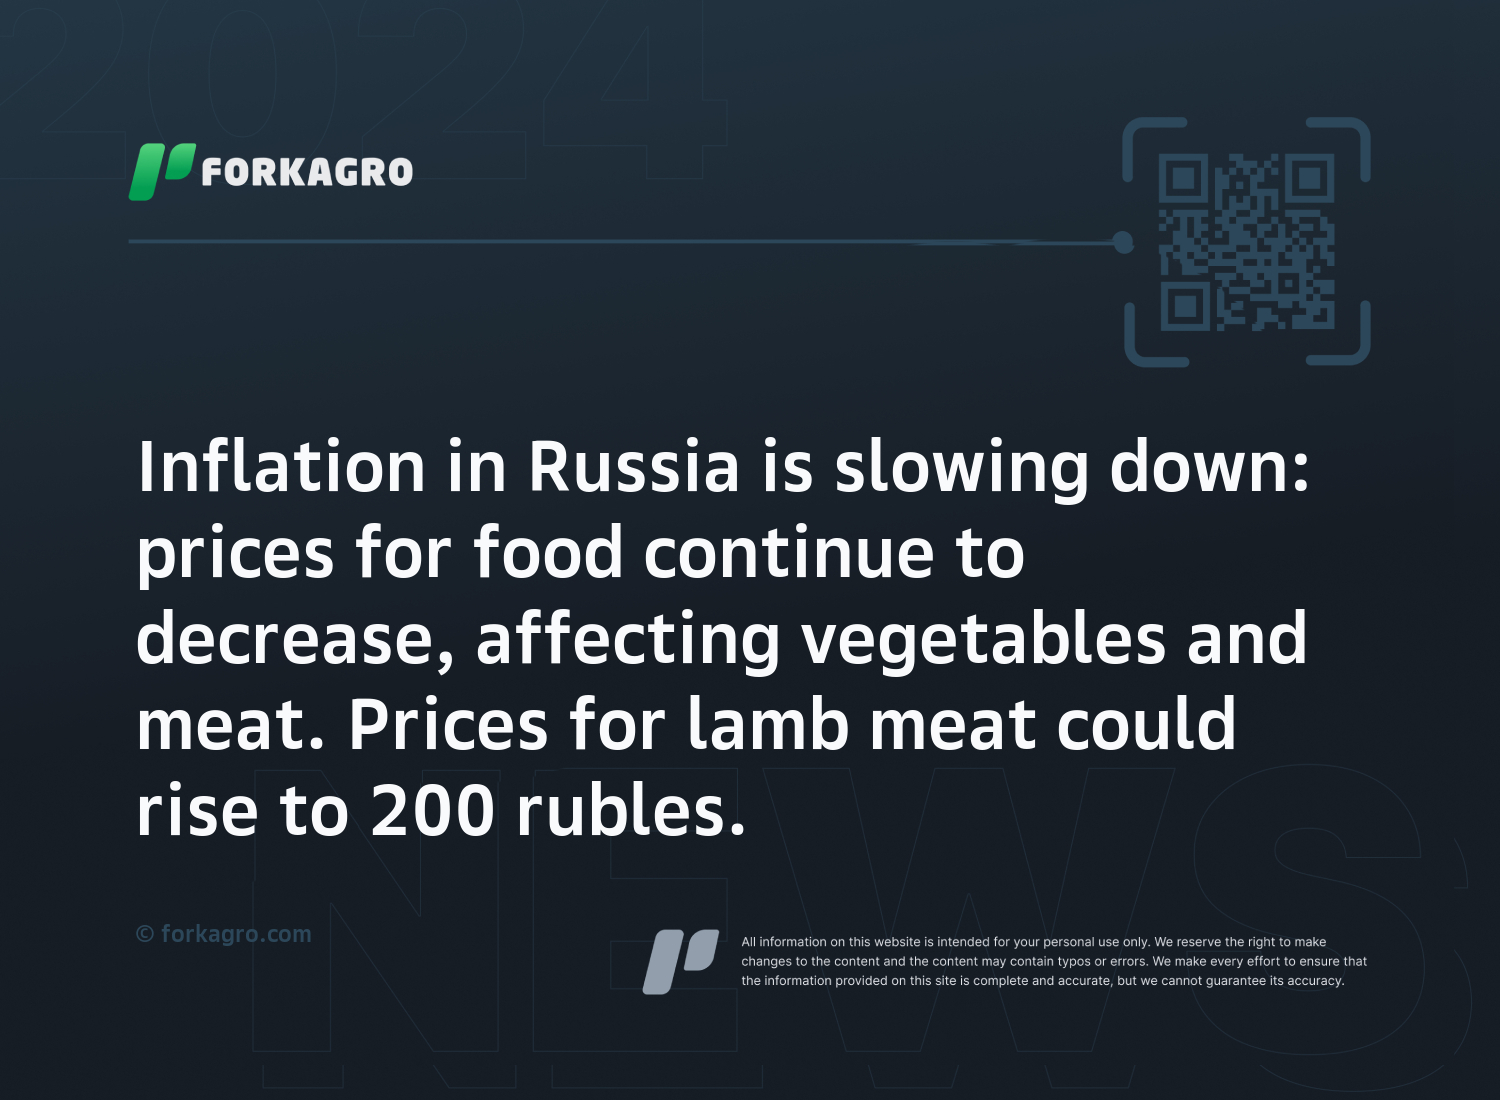 Inflation in Russia is slowing down: prices for food continue to decrease, affecting vegetables and meat. Prices for lamb meat could rise to 200 rubles.